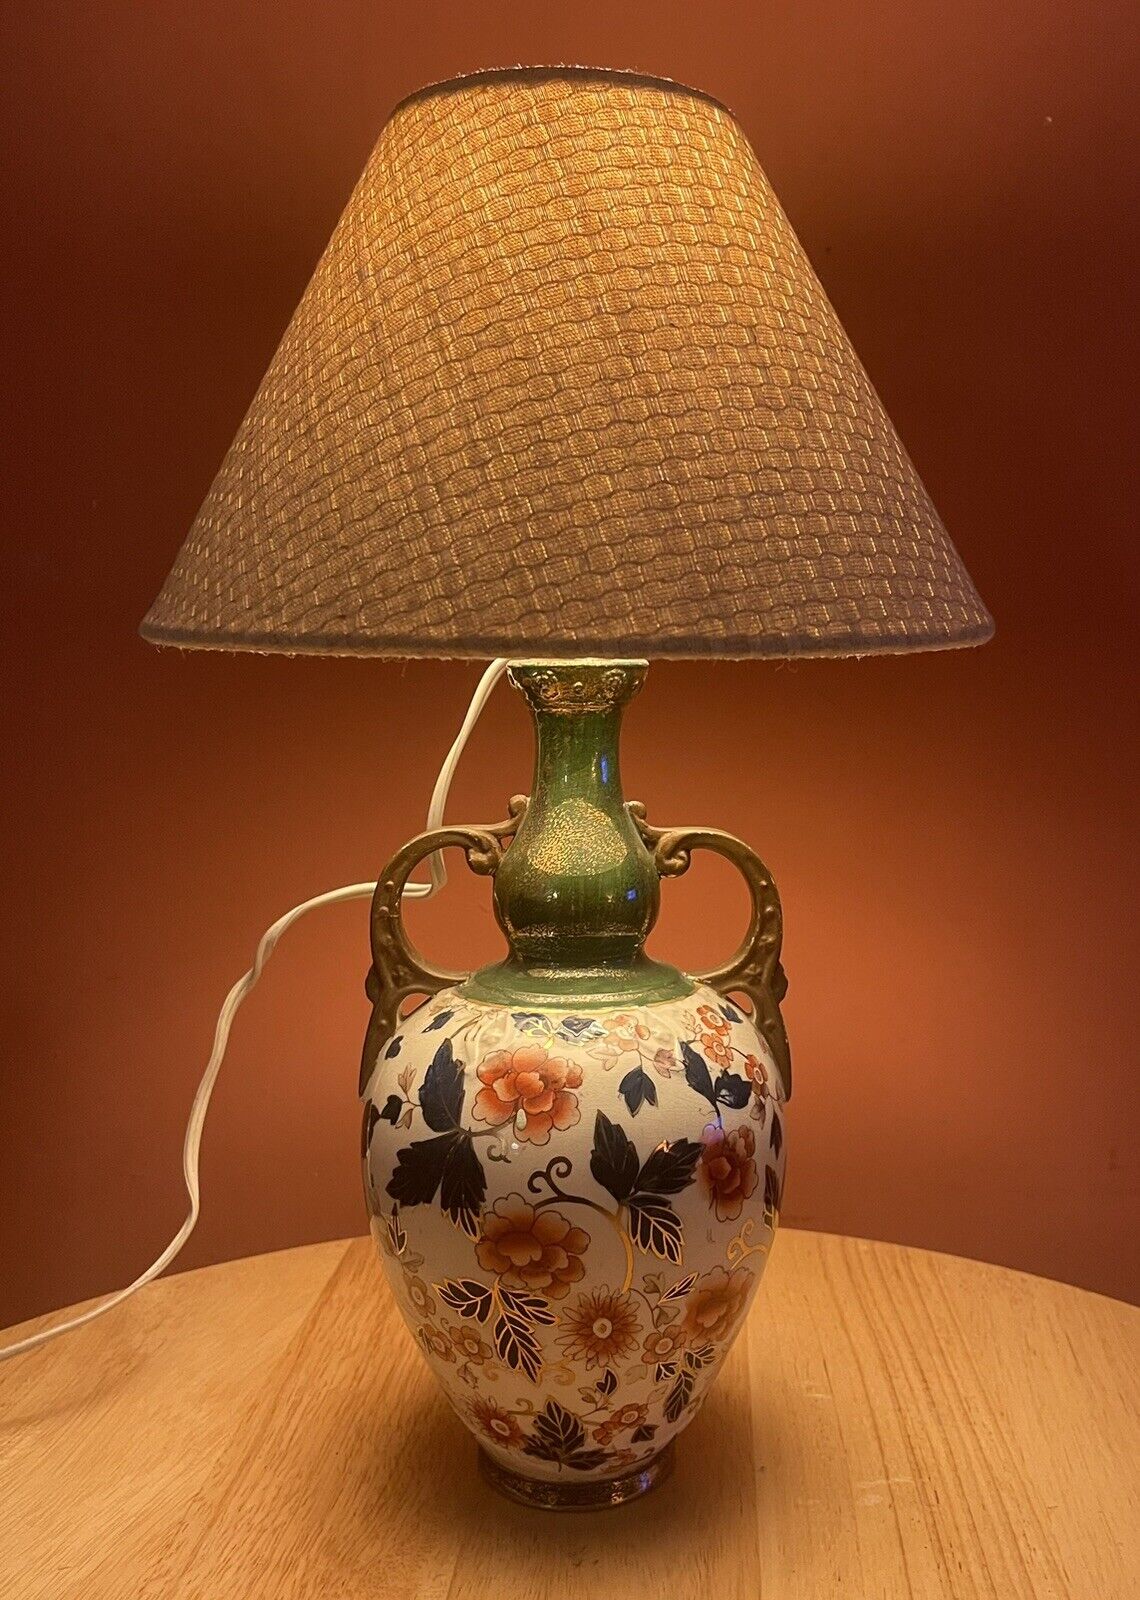 1880’s Enoch Wedgwood & Co Vase And Lamp Base With Fabric Woven Shade